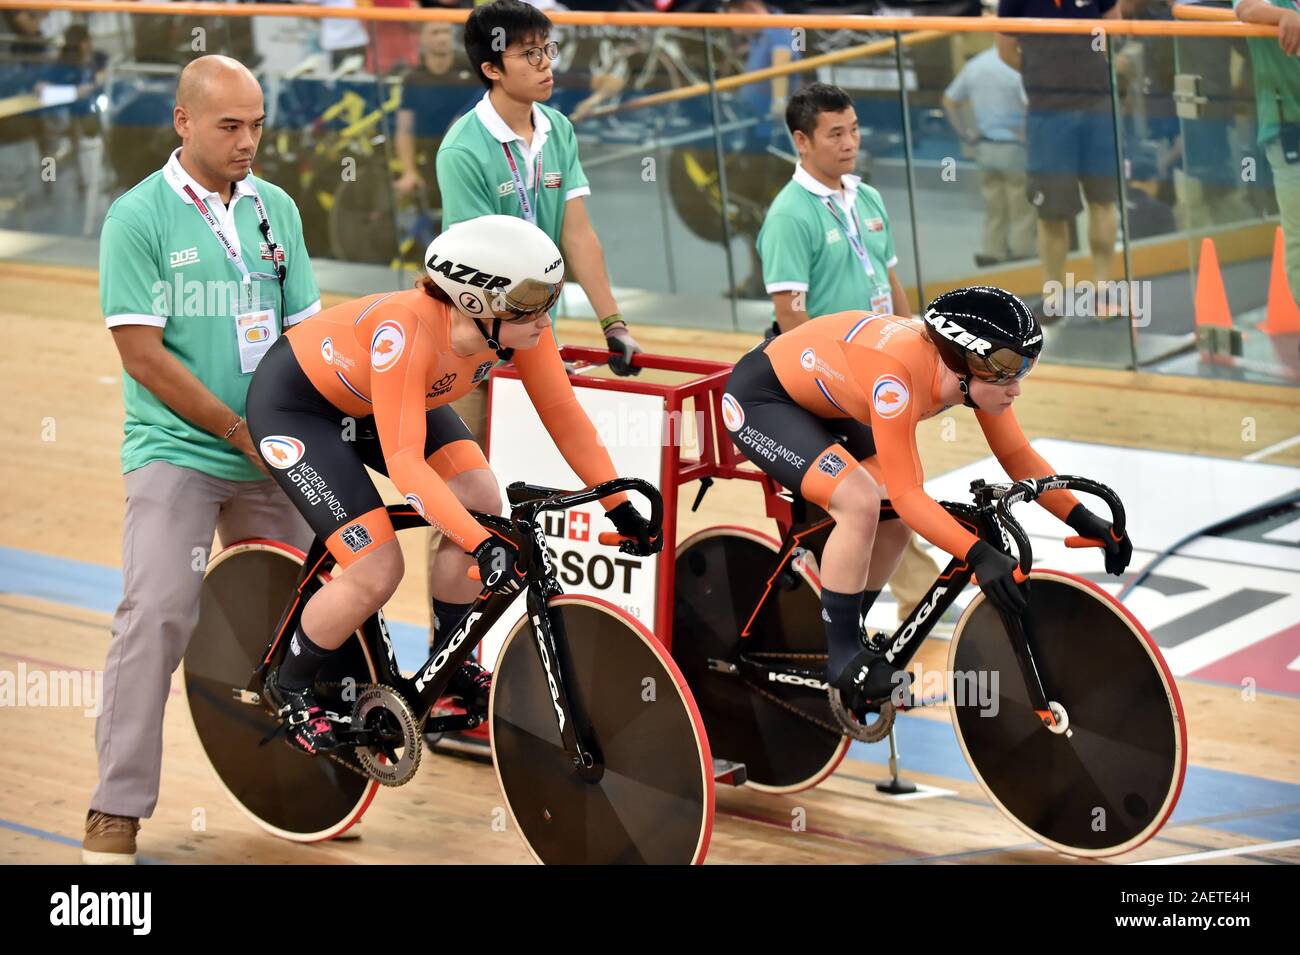 Cyclists compete at the 2019-2020 Tissot UCI Track Cycling World Cup in Hong Kong, China, 29 November 2019. Stock Photo